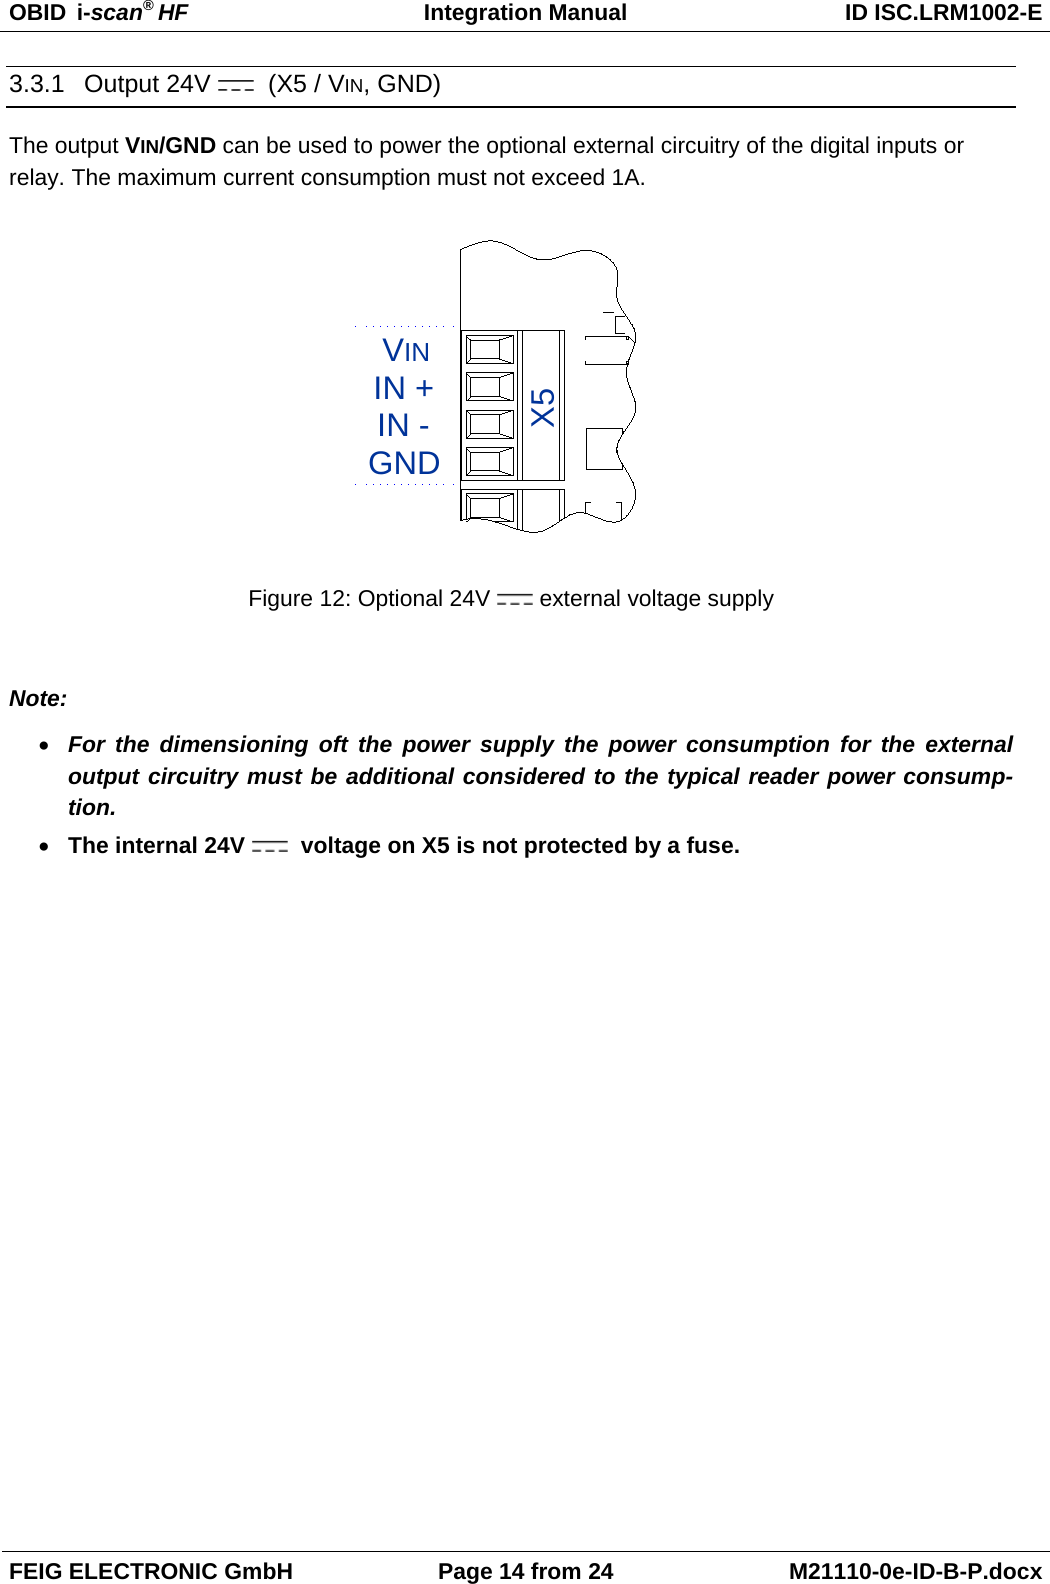 OBID  i-scan® HF Integration Manual ID ISC.LRM1002-E  FEIG ELECTRONIC GmbH Page 14 from 24 M21110-0e-ID-B-P.docx  3.3.1 Output 24V    (X5 / VIN, GND) The output VIN/GND can be used to power the optional external circuitry of the digital inputs or relay. The maximum current consumption must not exceed 1A.  GNDVININ -IN +X5 Figure 12: Optional 24V  external voltage supply  Note: • For the dimensioning oft the power supply  the power consumption for the external output circuitry must be additional considered to the typical reader power consump-tion. • The internal 24V    voltage on X5 is not protected by a fuse.   